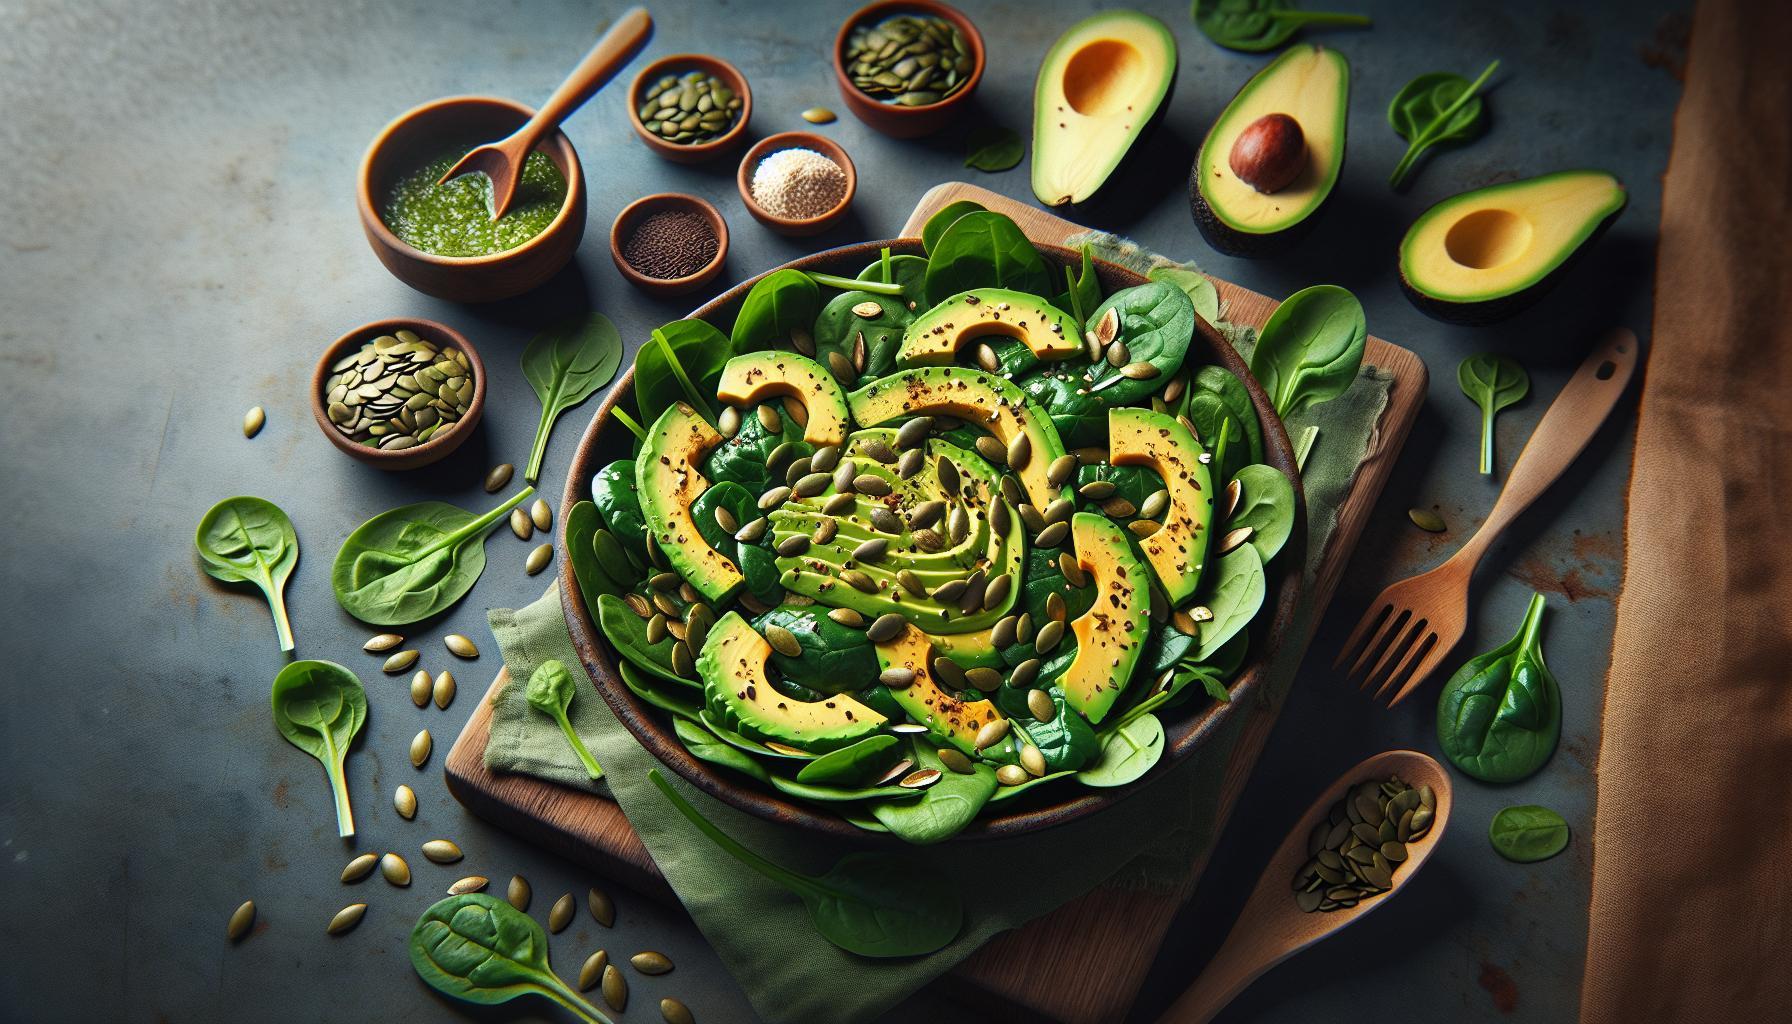 Superfood Delight: Nutritious Spinach, Avocado, and Pumpkin Seed Salad Recipe